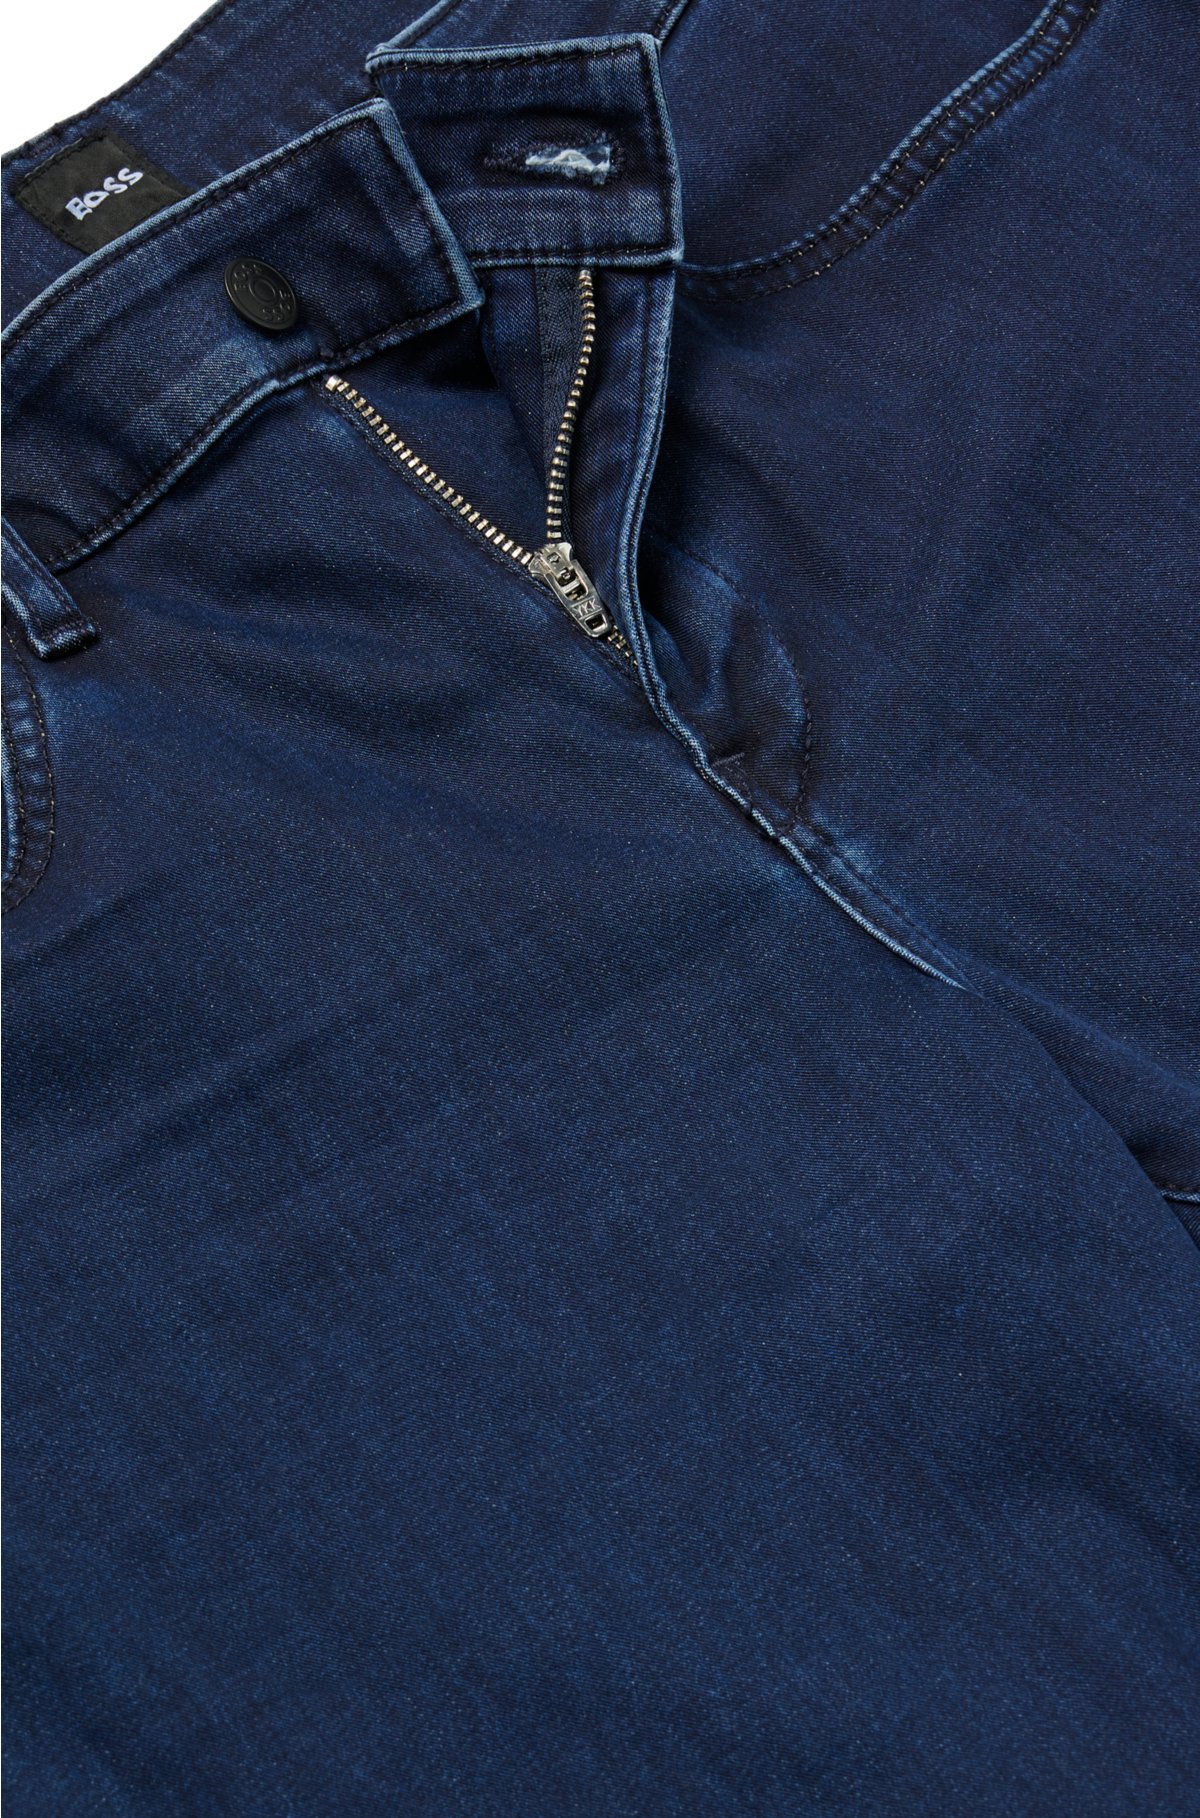 BOSS - Slim-fit jeans in blue satin-touch denim